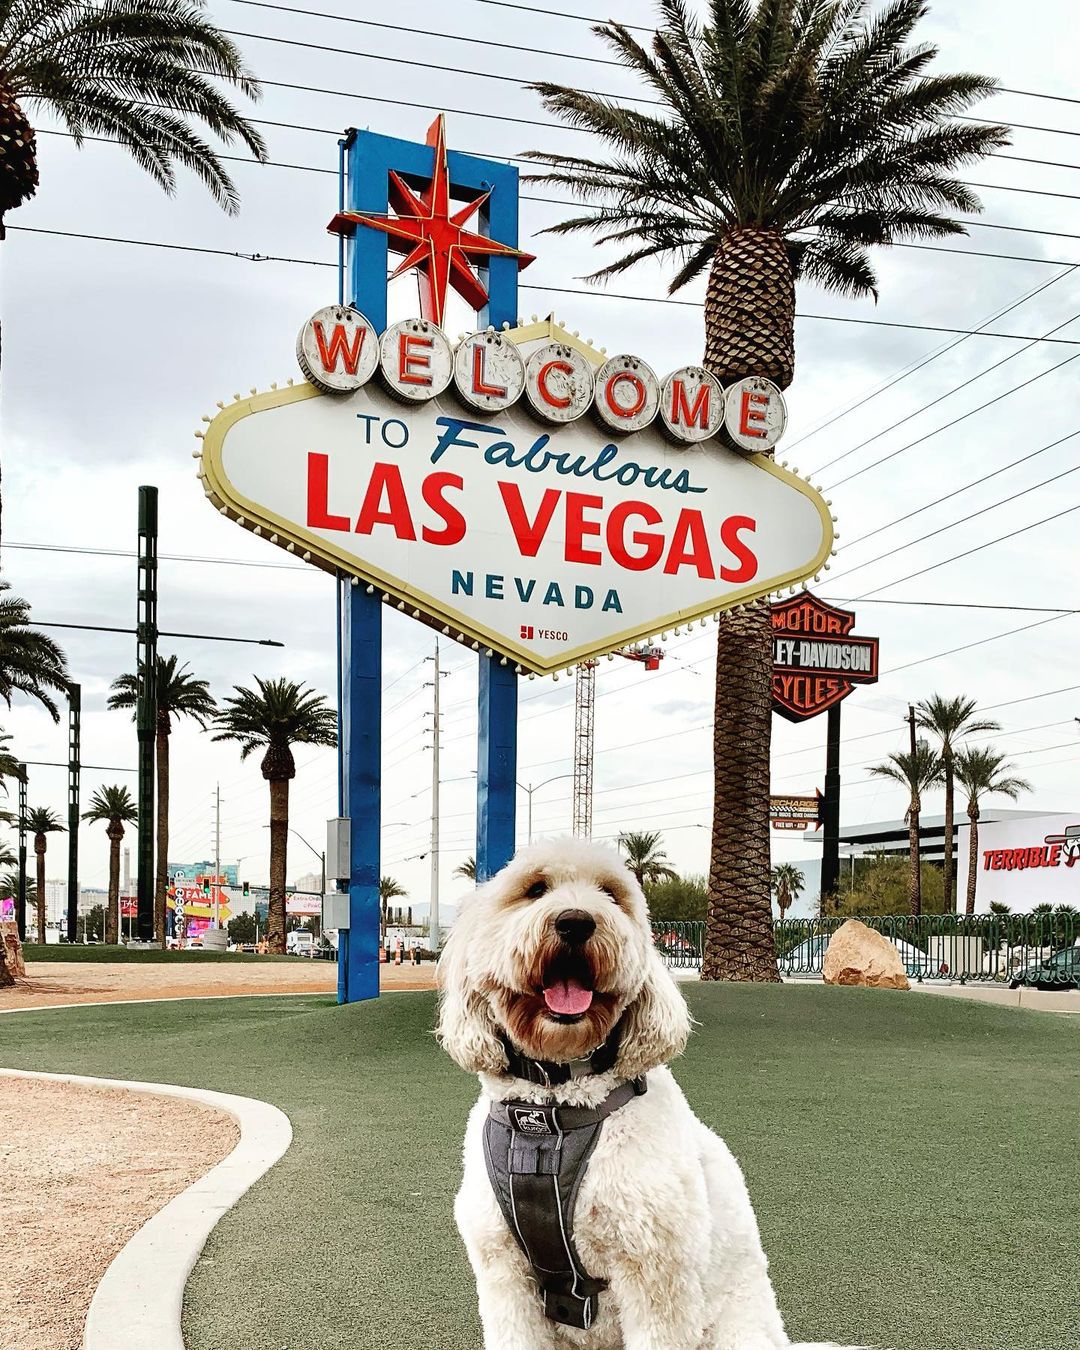 labradoodle standing in front of the "Welcome to Las Vegas" sign photo by Instagram user @mr.darcy_the_labradoodle